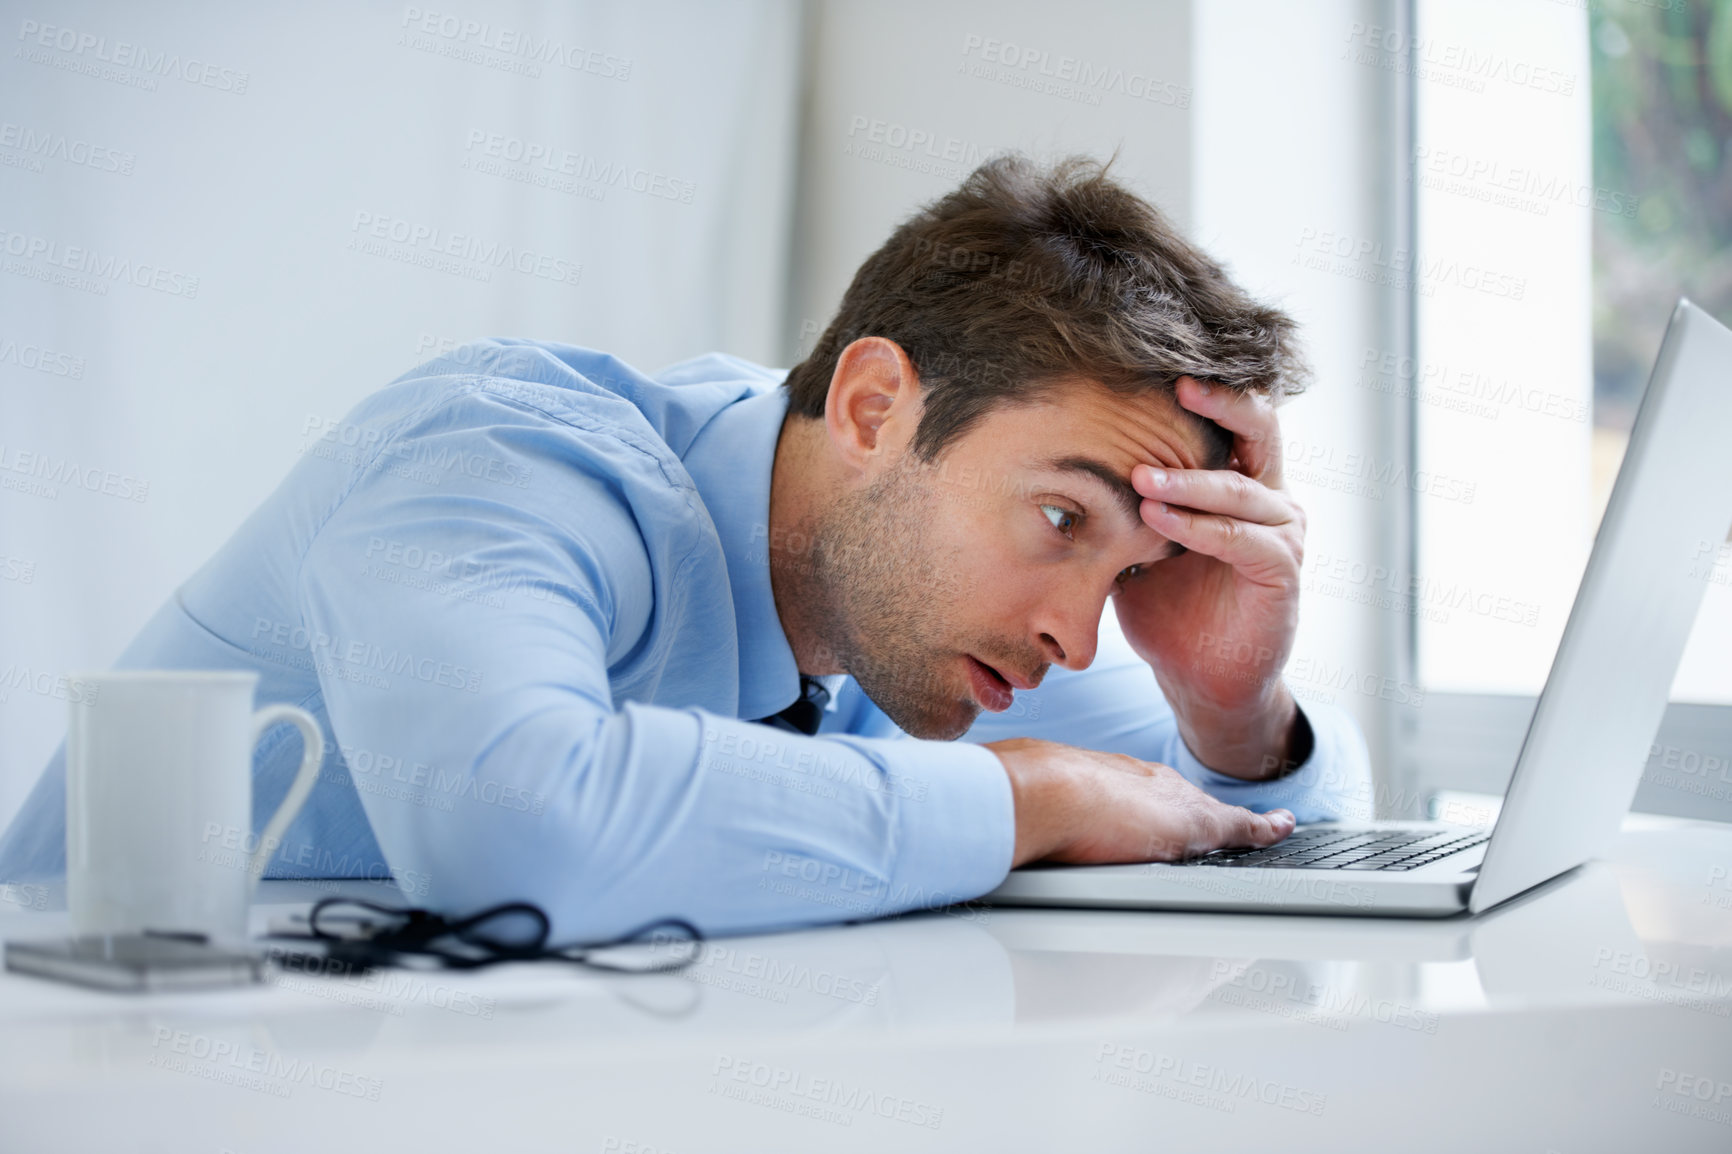 Buy stock photo A exhausted businessman falling asleep behind his laptop